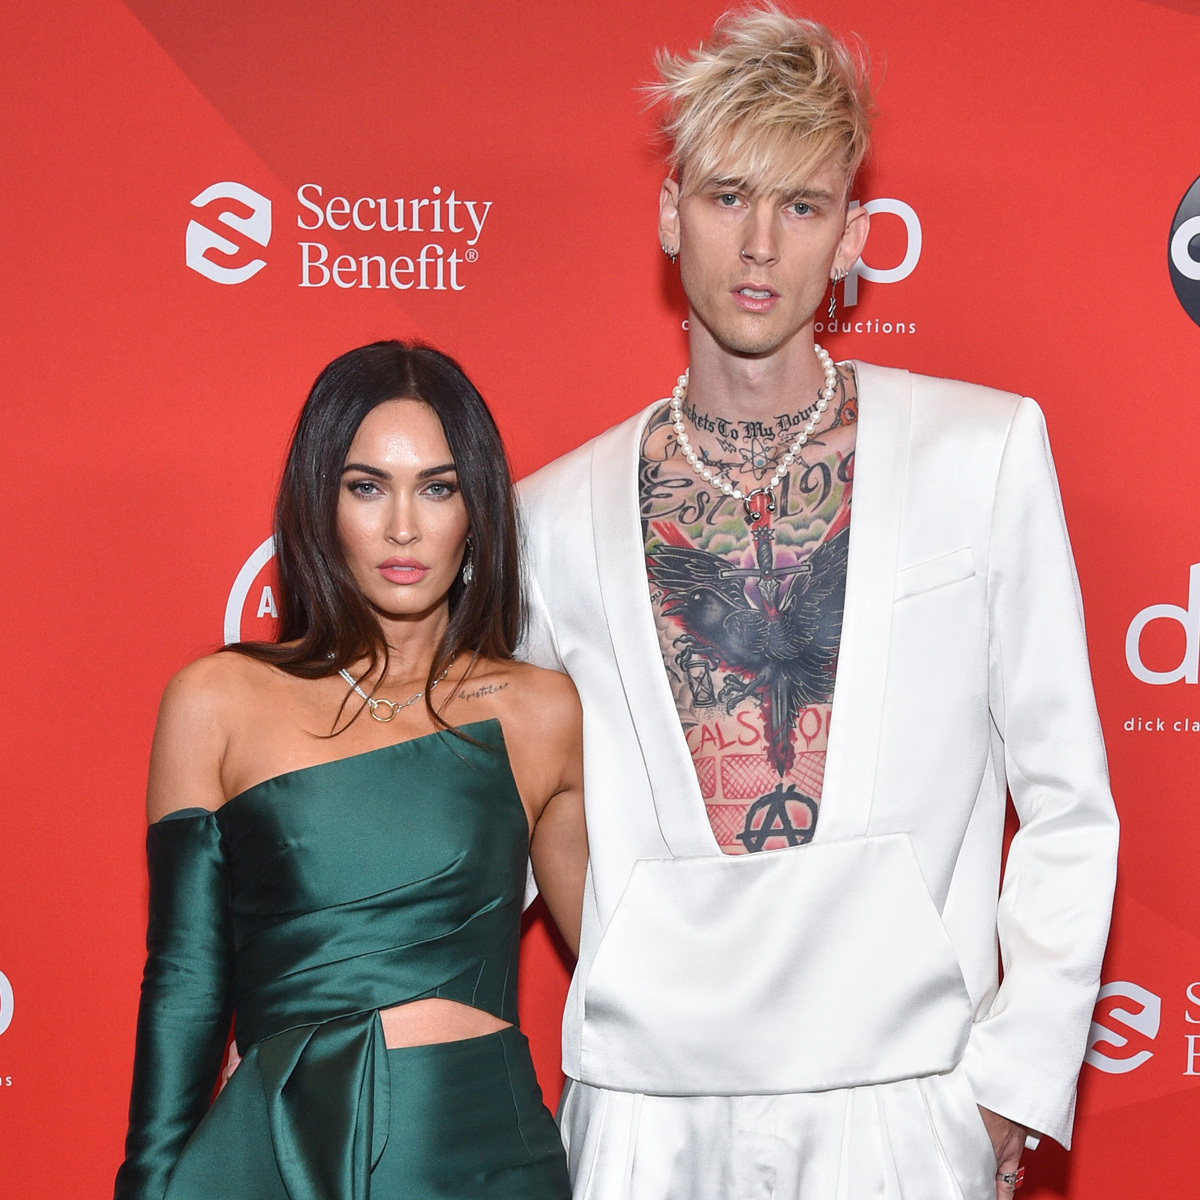 Every Detail About Machine Gun Kelly and Megan Fox's Relationship